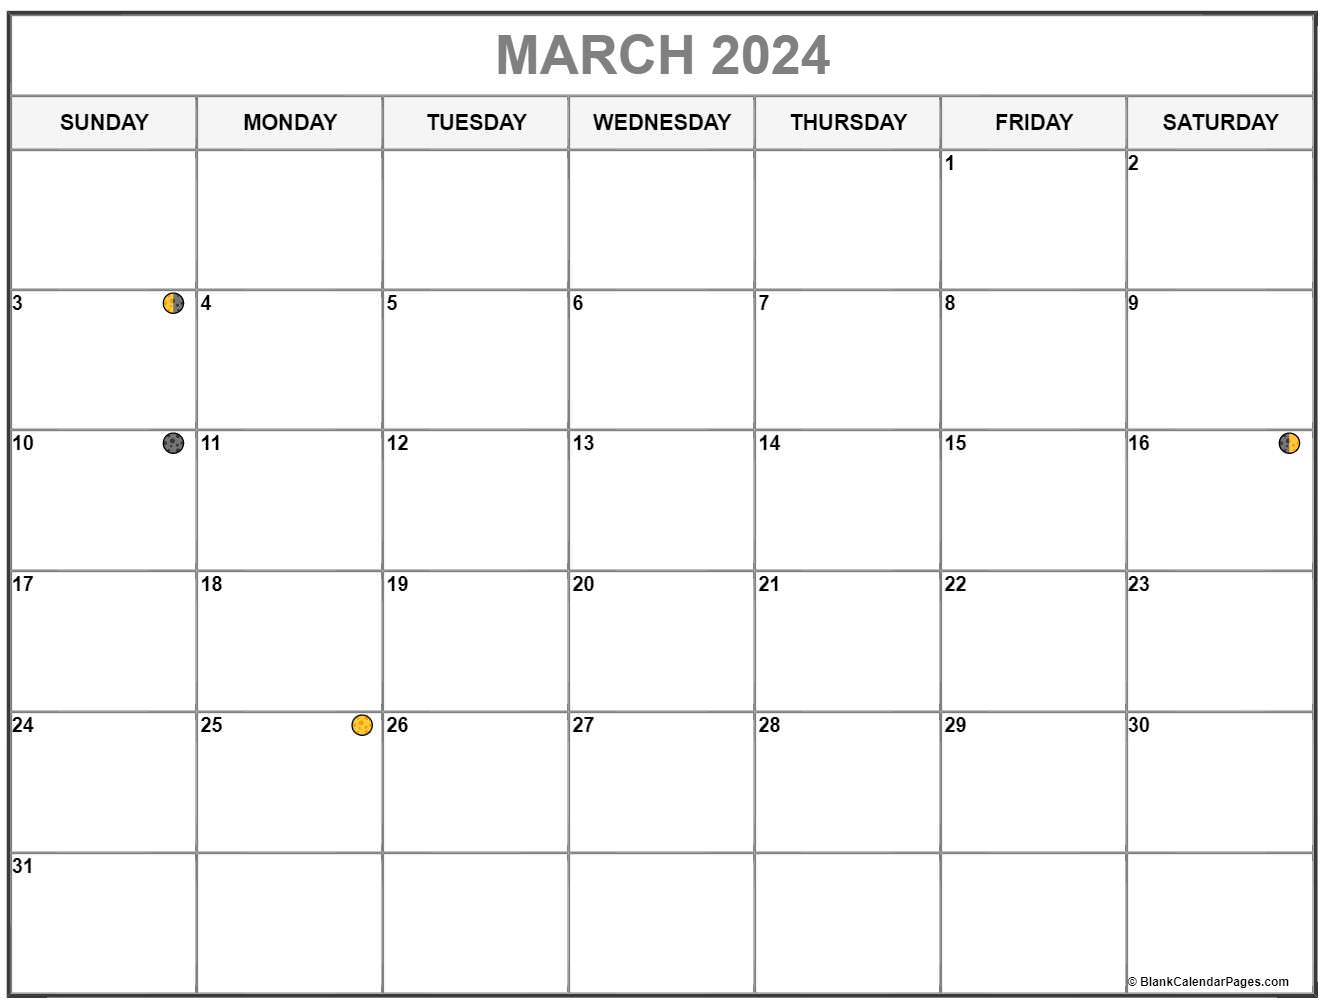 March 2023 Moon Phases 2023 Calendar